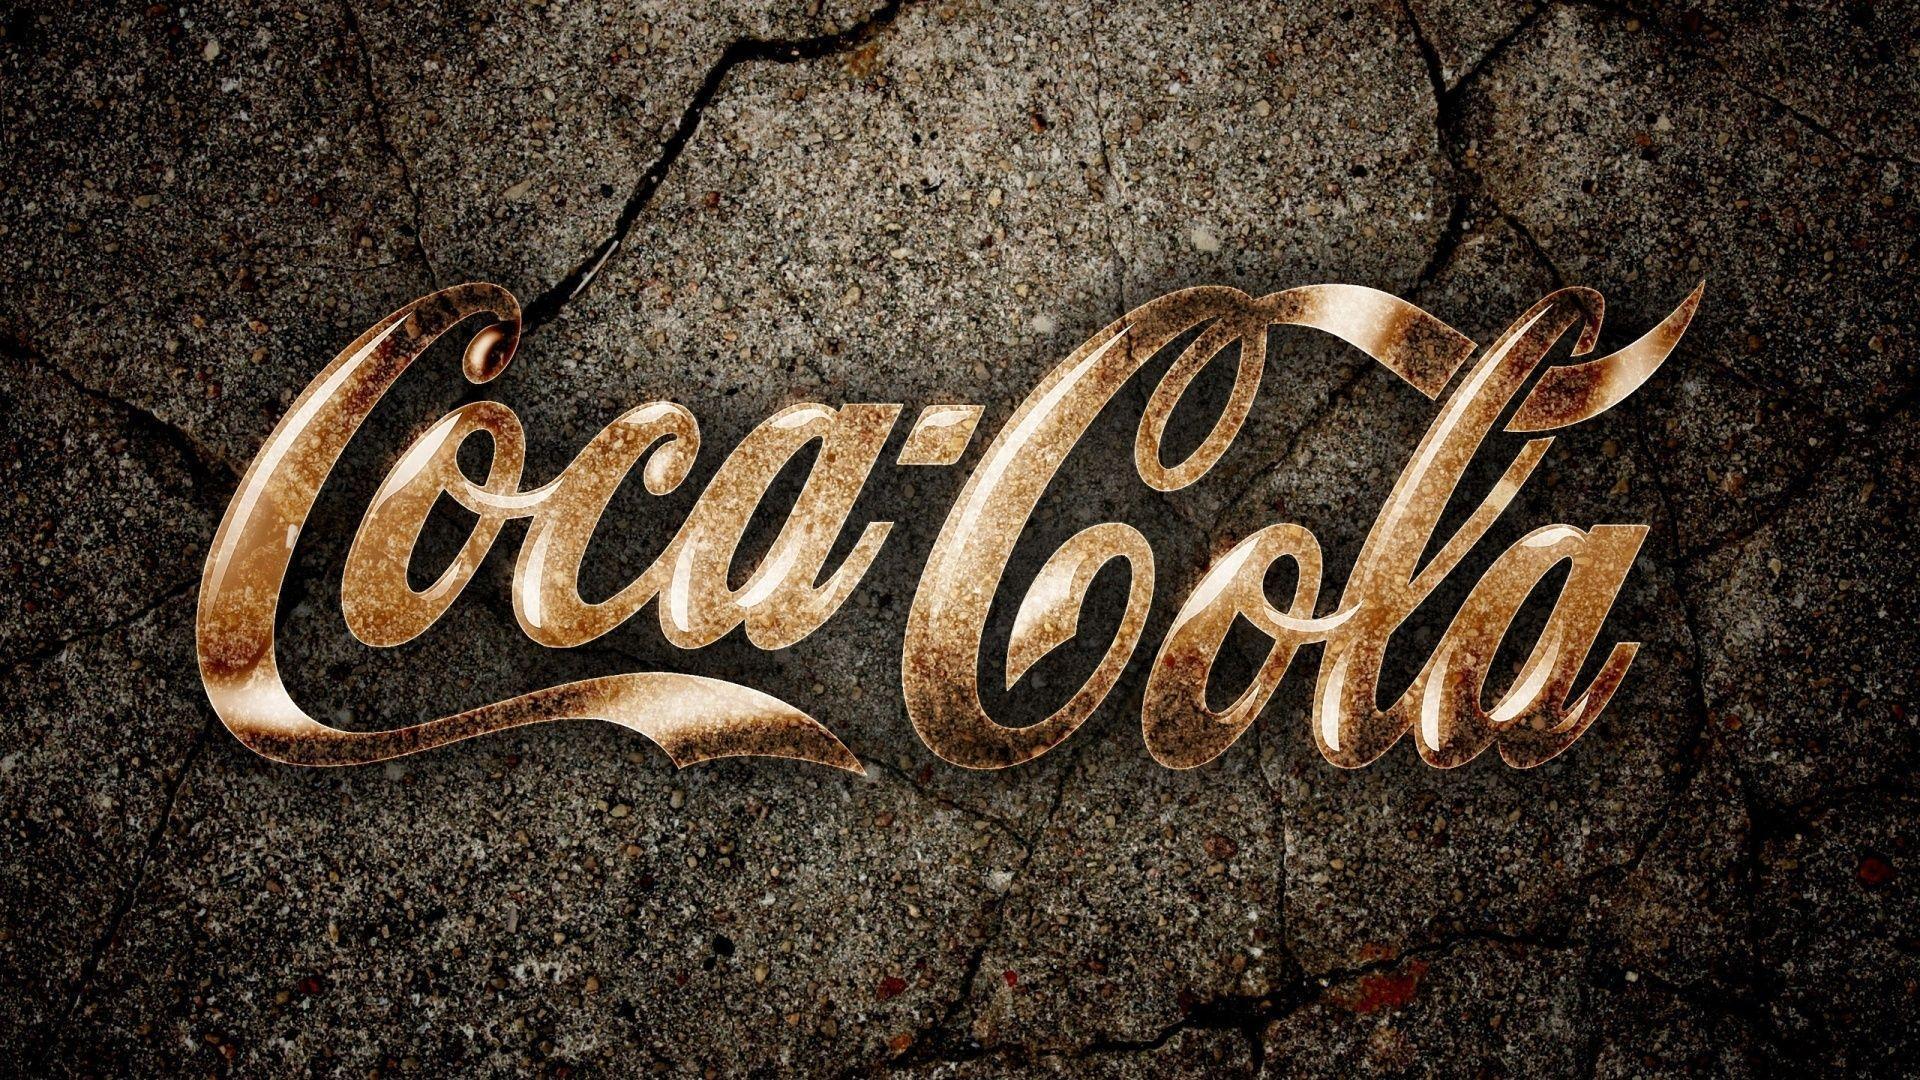 Coca Cola Background Free Download. HD Wallpaper, Background